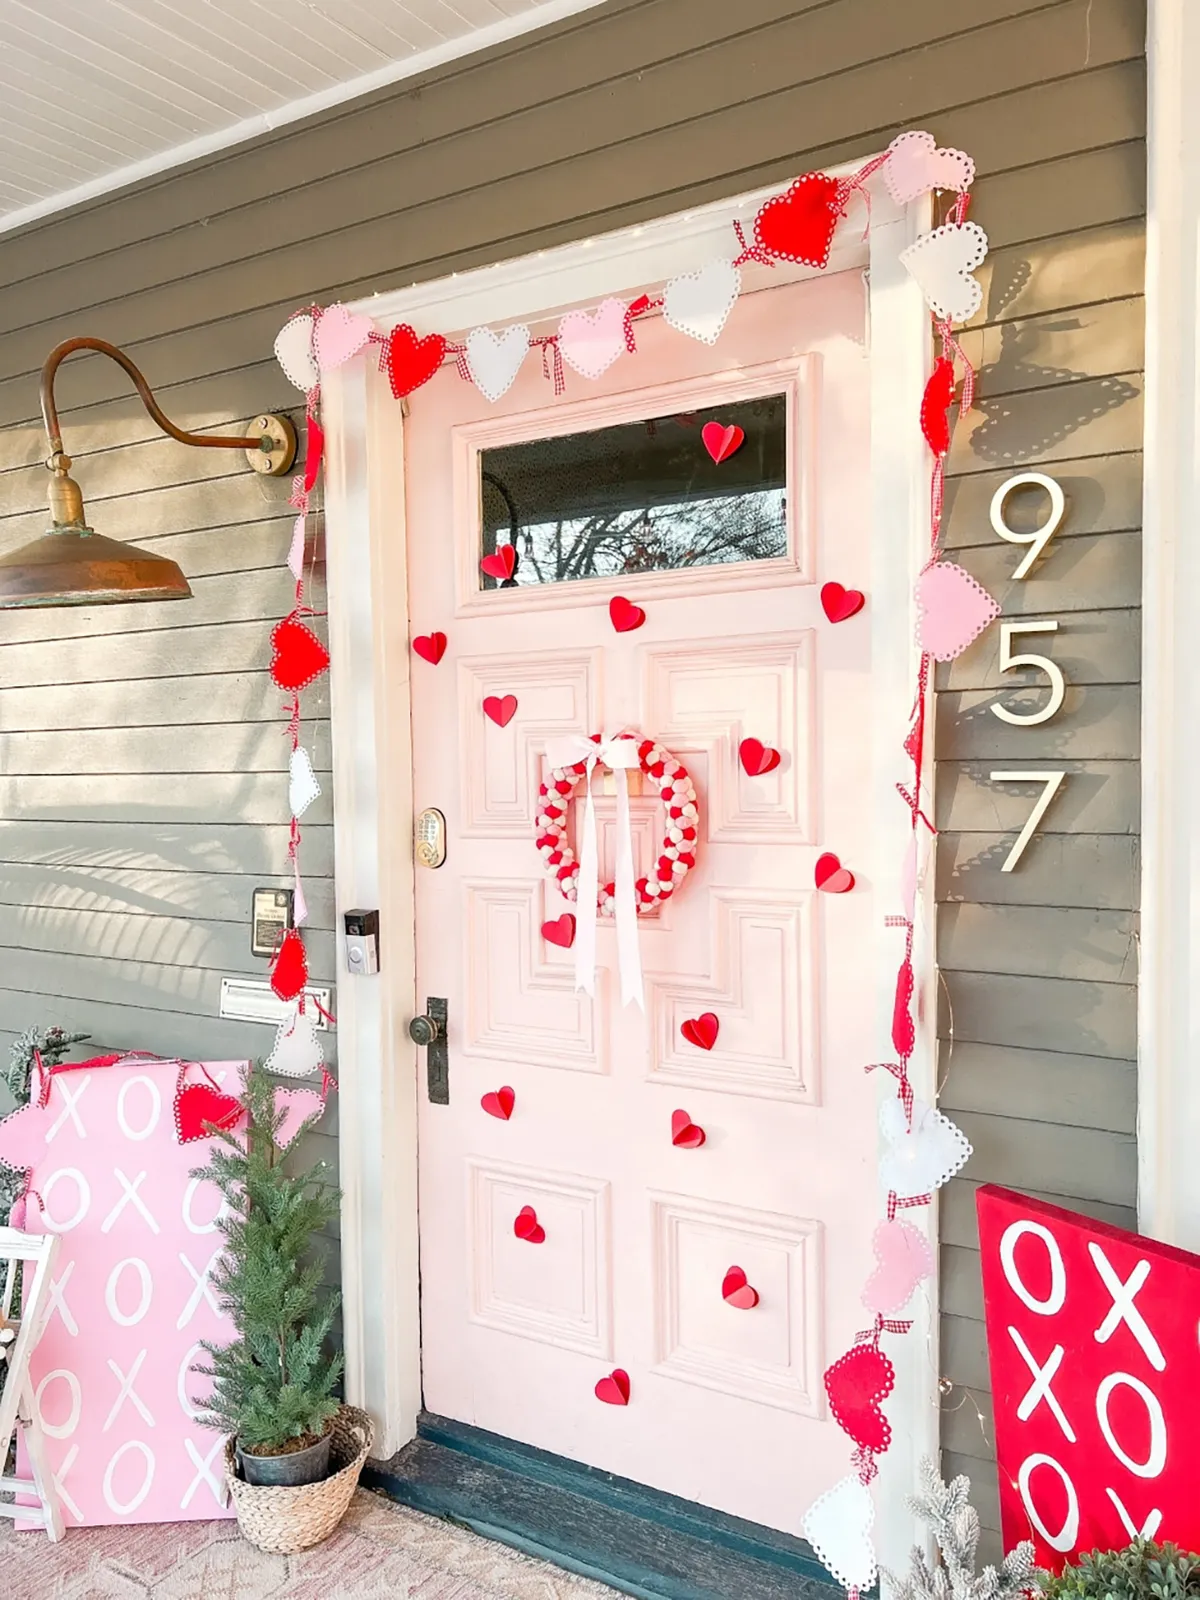 diy valentines decorations - a decorated porch with lots of love hearts